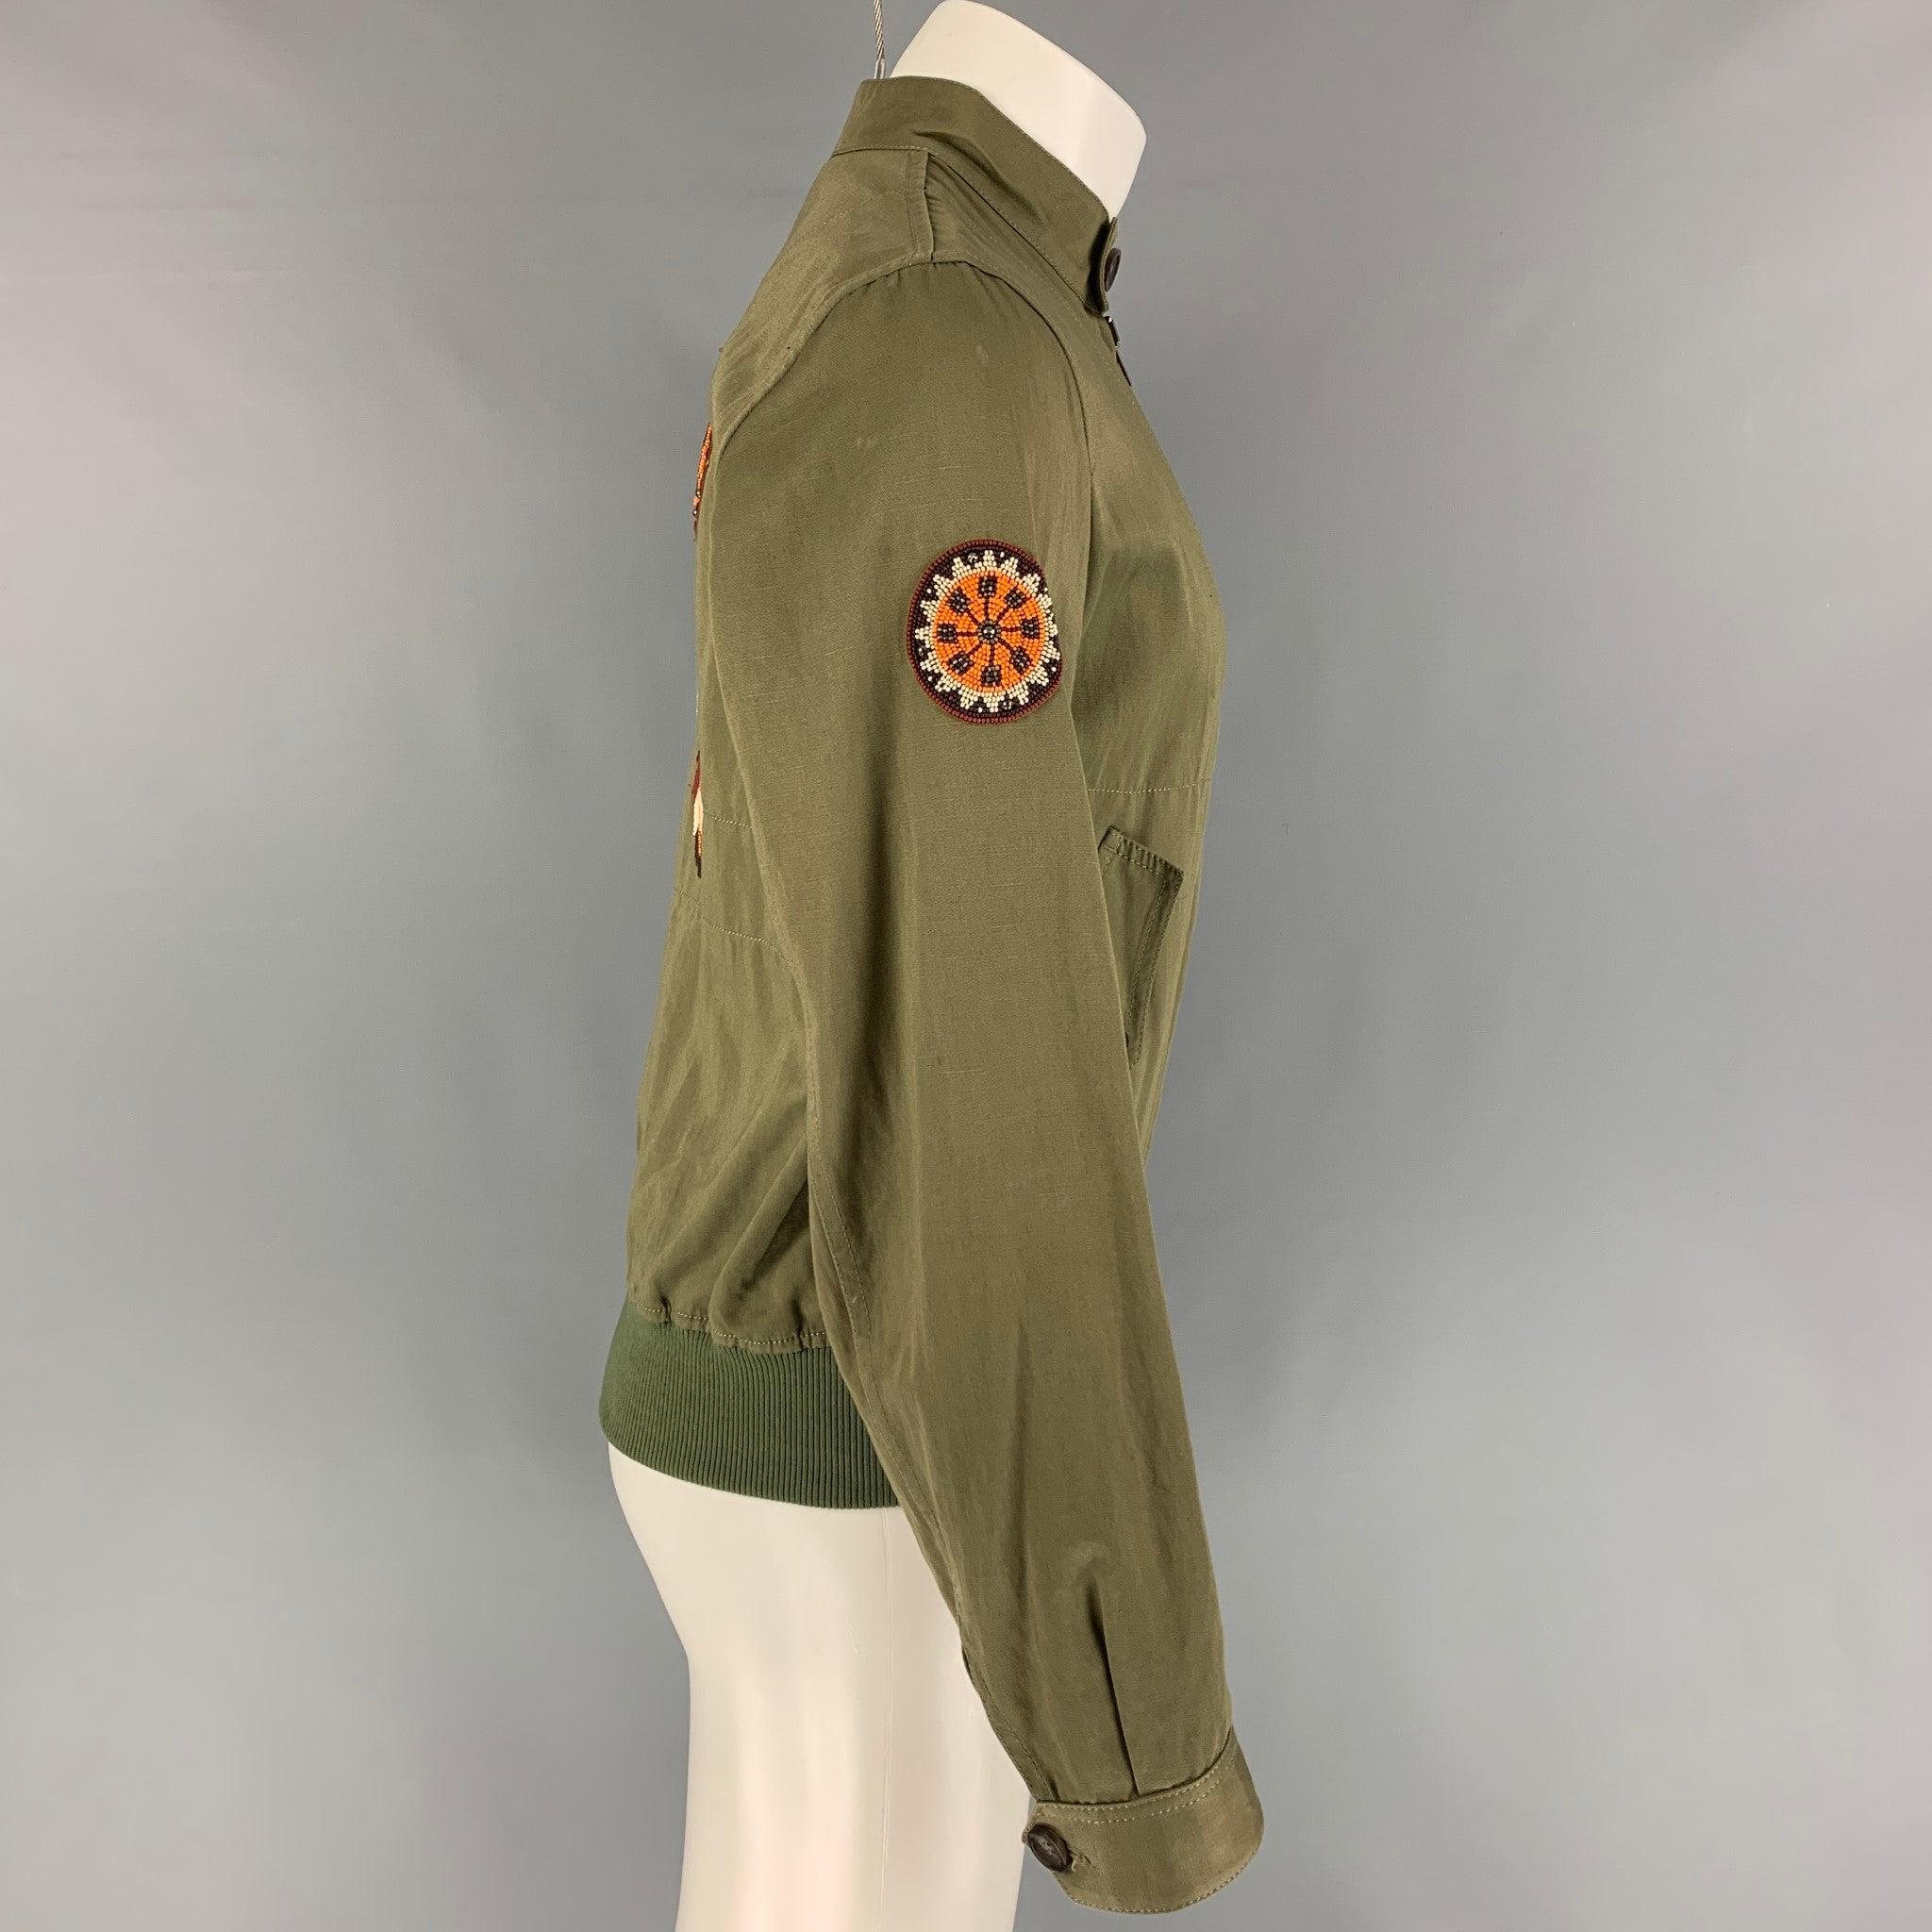 ROBERTO CAVALLI 2016 jacket comes in a green cotton featuring a loose fit, ribbed hem, beaded sleeve details, top stitching, flap pockets, back beaded animal design, anda full zip up closure. Made in Italy.
Very Good
Pre-Owned Condition. 

Marked:  